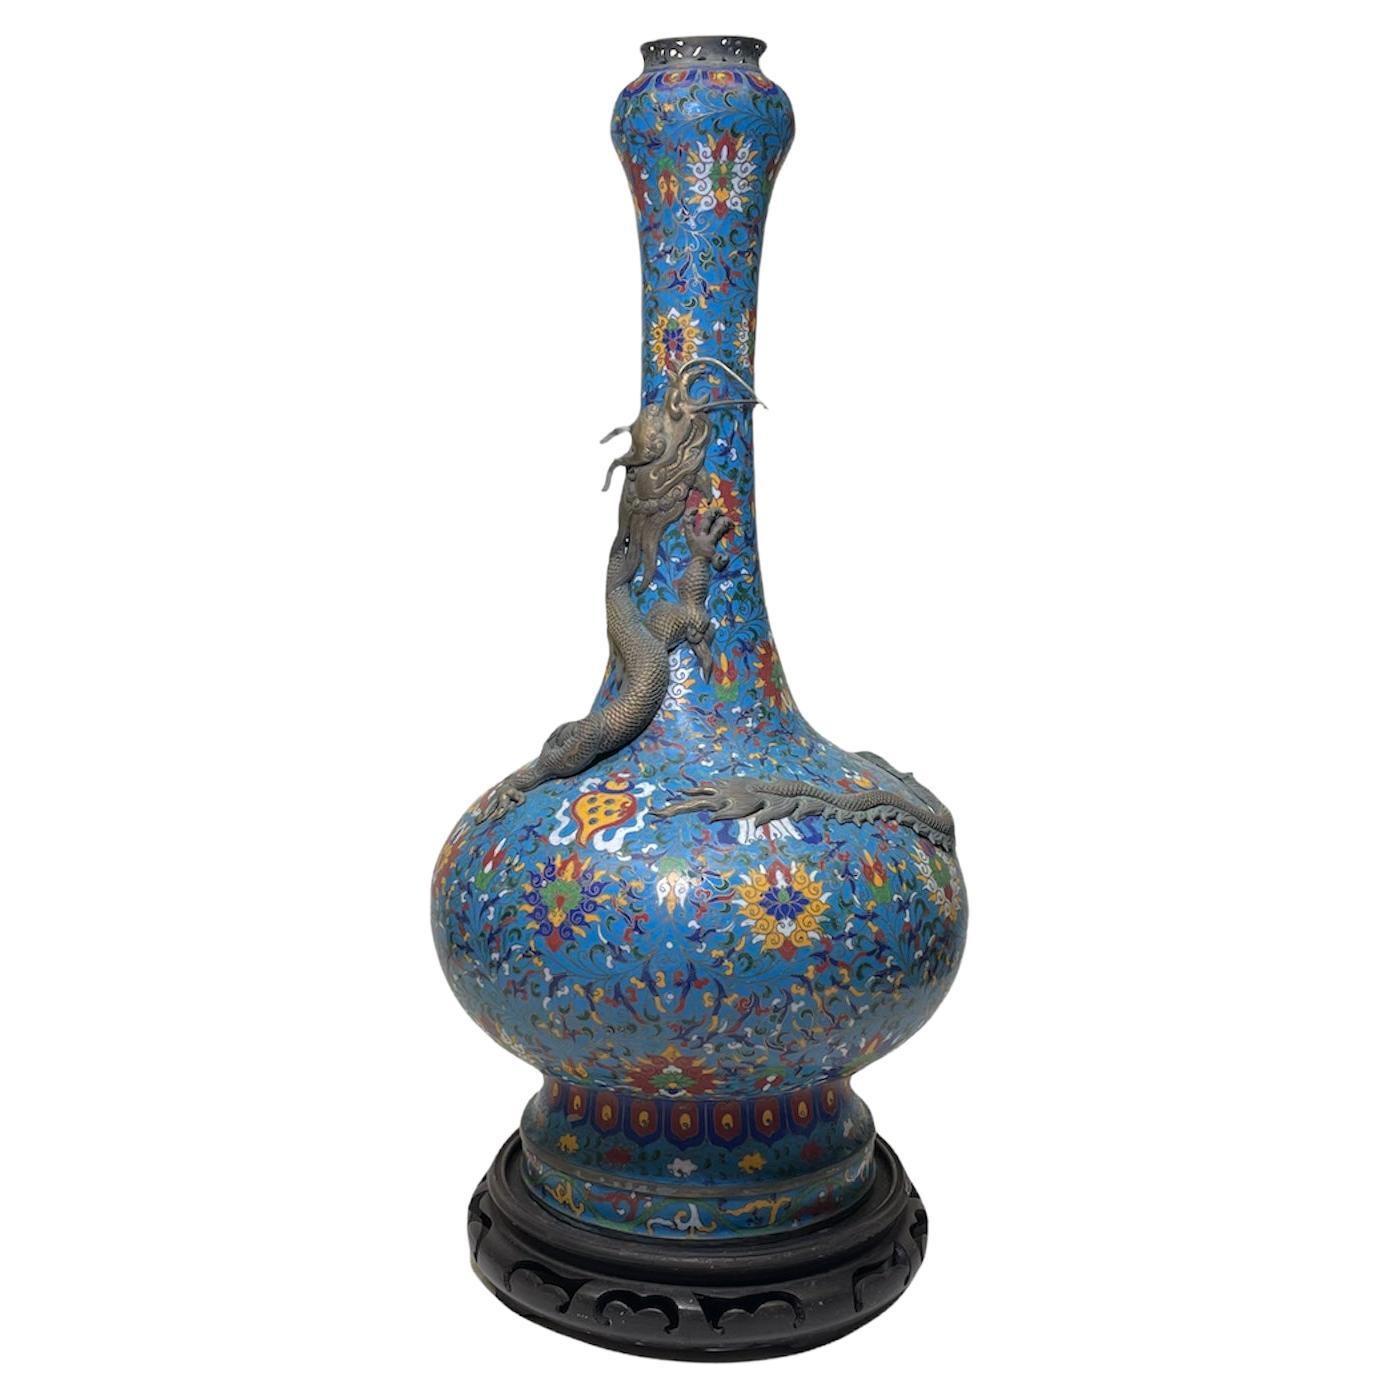 Rare Chinese Large and Long Cloisonné Urn Vase